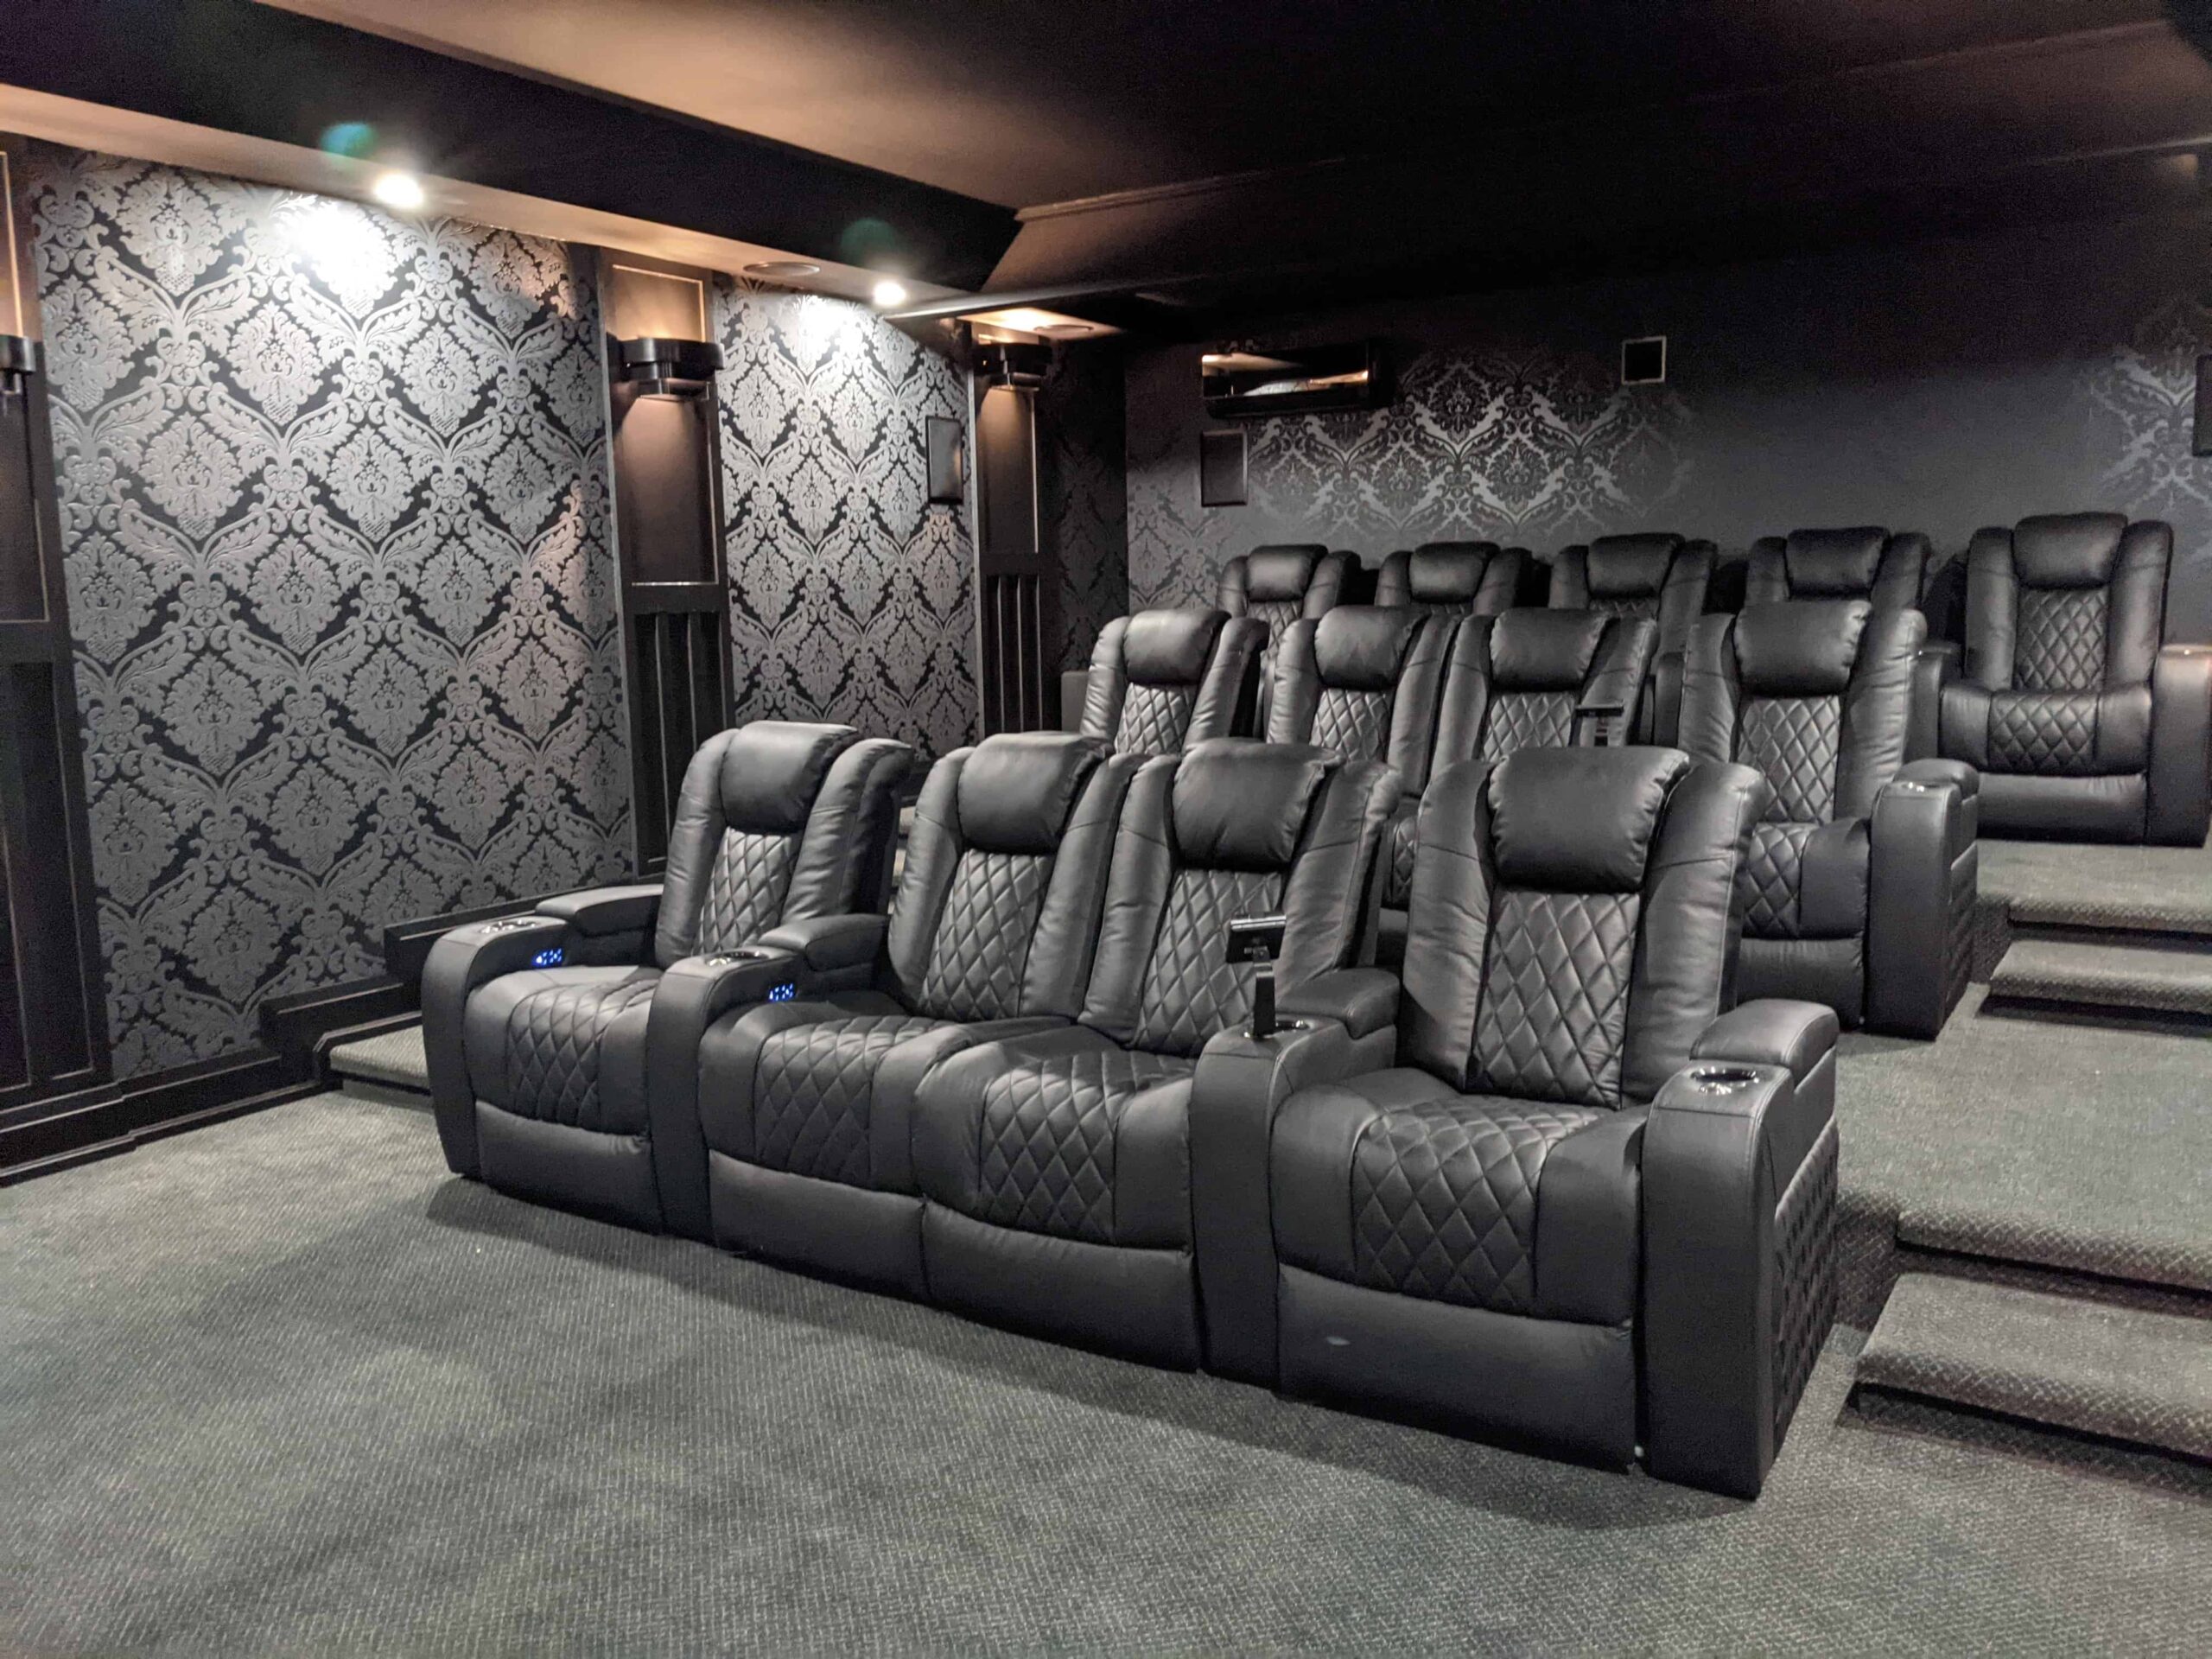 Home Theater Room scaled